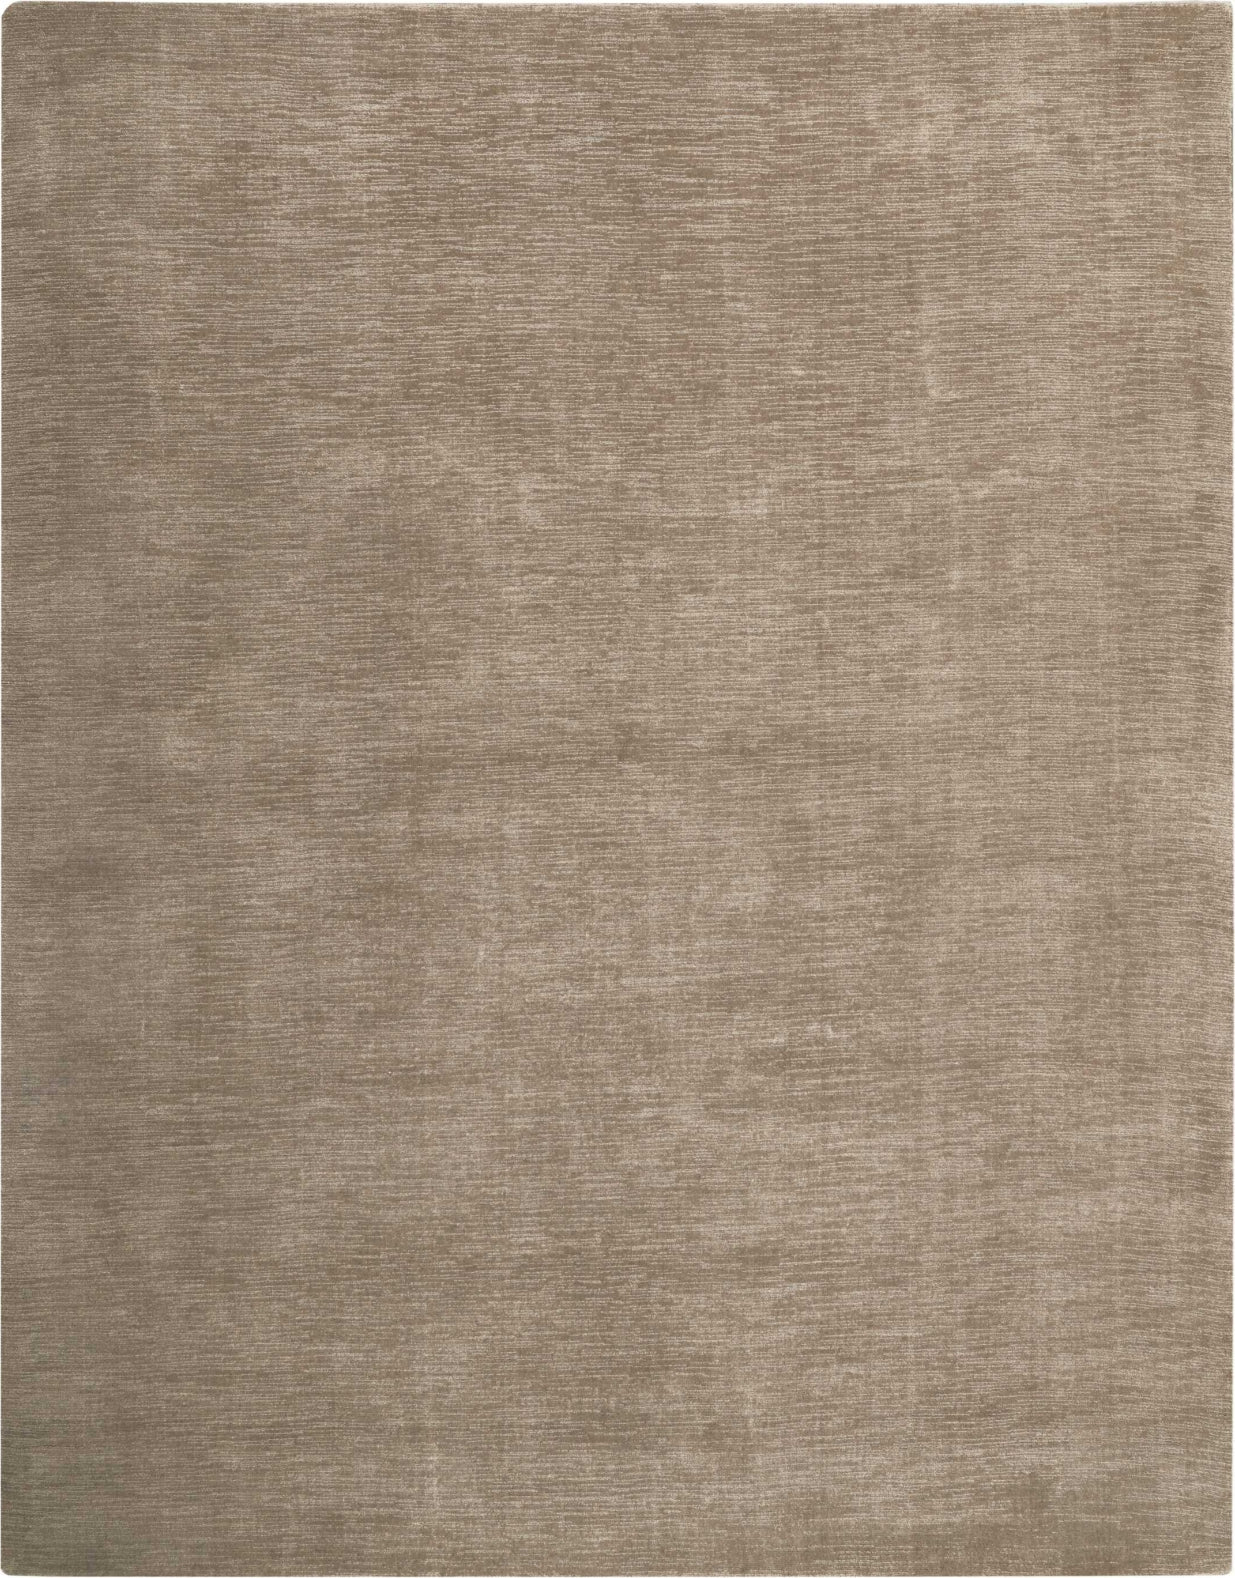 Christopher Guy Mohair Luxueaux CGM01 Taupe Area Rug